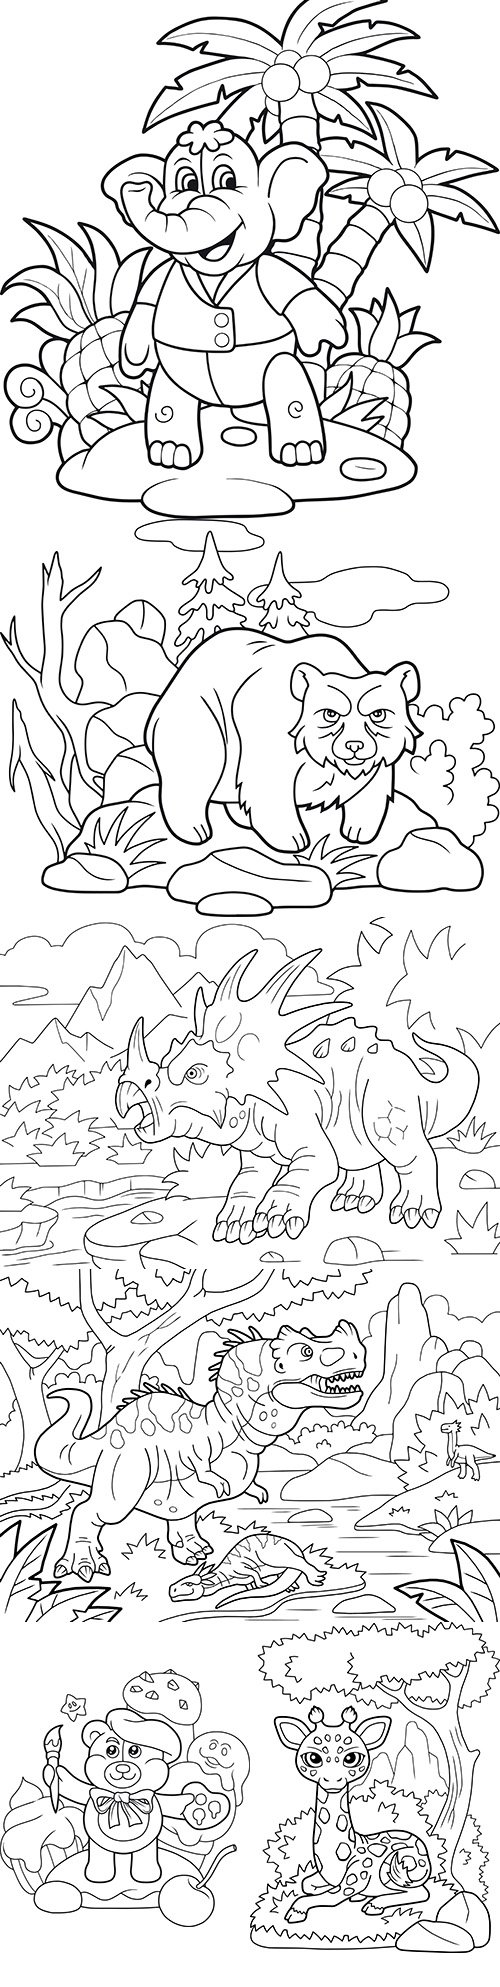 Cute Animals and Nature Illustrations for Coloring Book